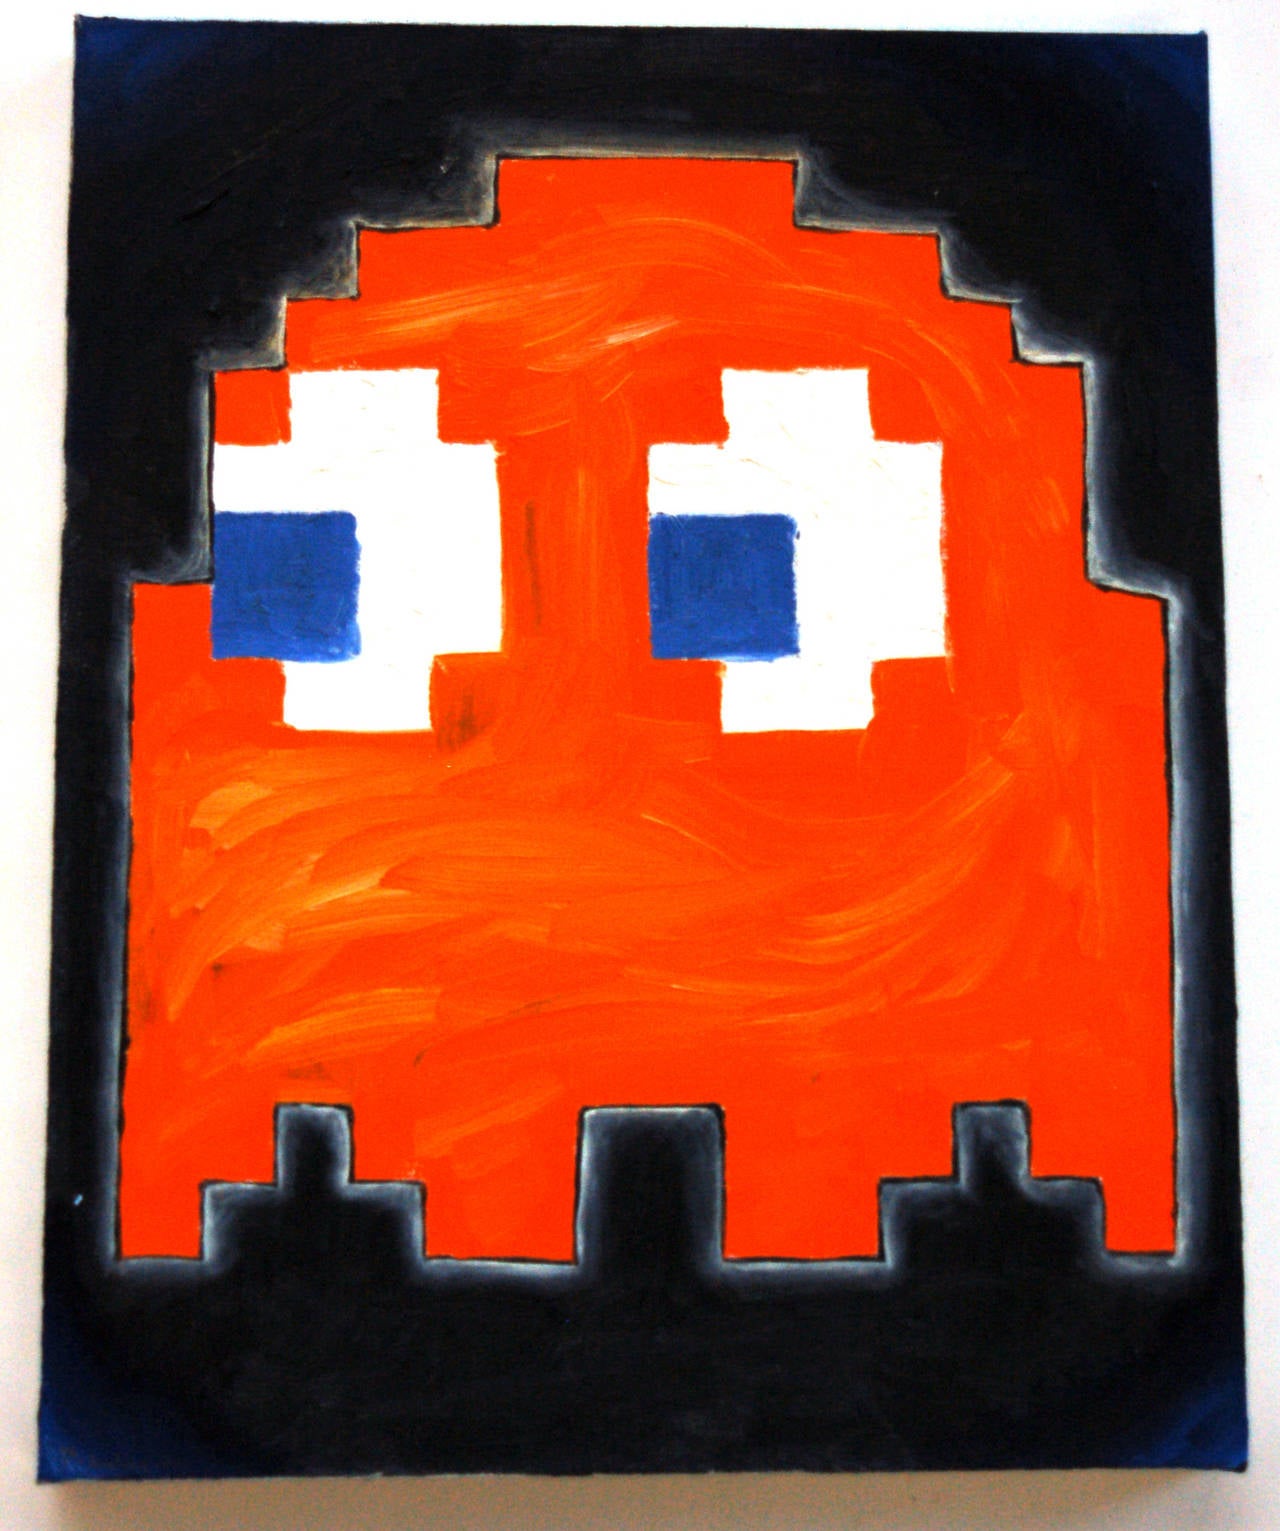 Pac-Man Ghosts (set of 4)
Inky, Blinky, Pinky, and Clyde
Acrylic on canvas
20 x 16 inches (each)
signed and dated on verso